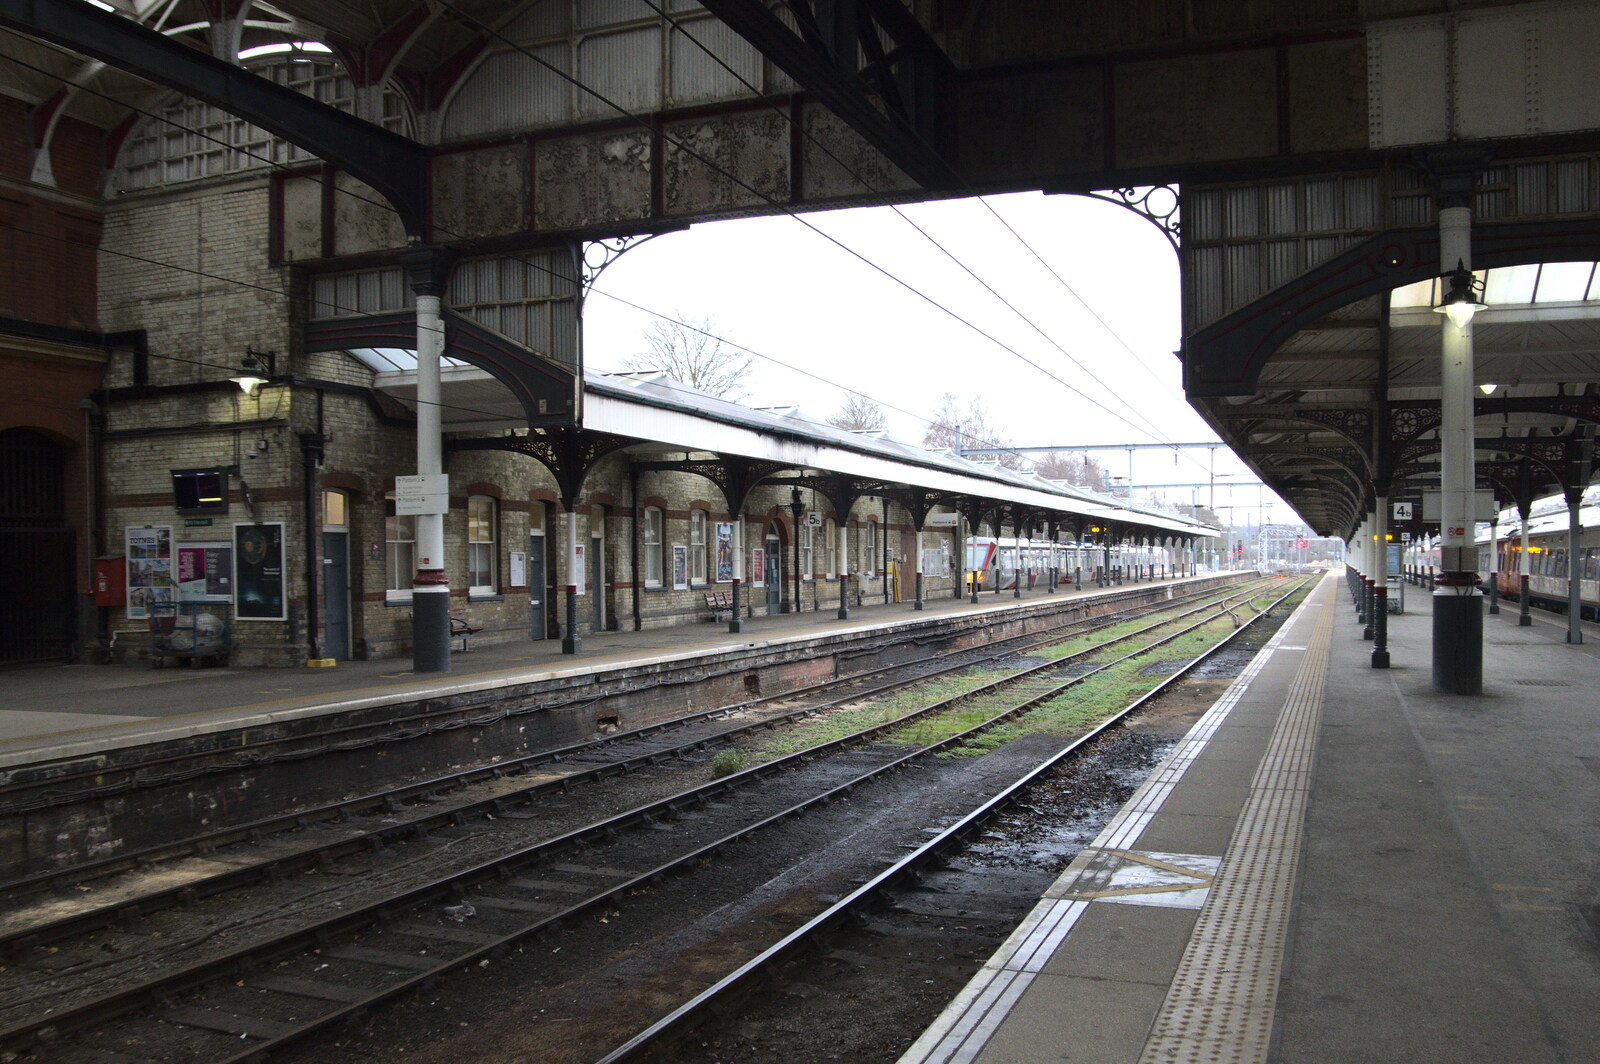 Norwich's platforms 4 and 5 are empty for a change from The Lost Pubs of Norwich, Norfolk - 13th February 2022